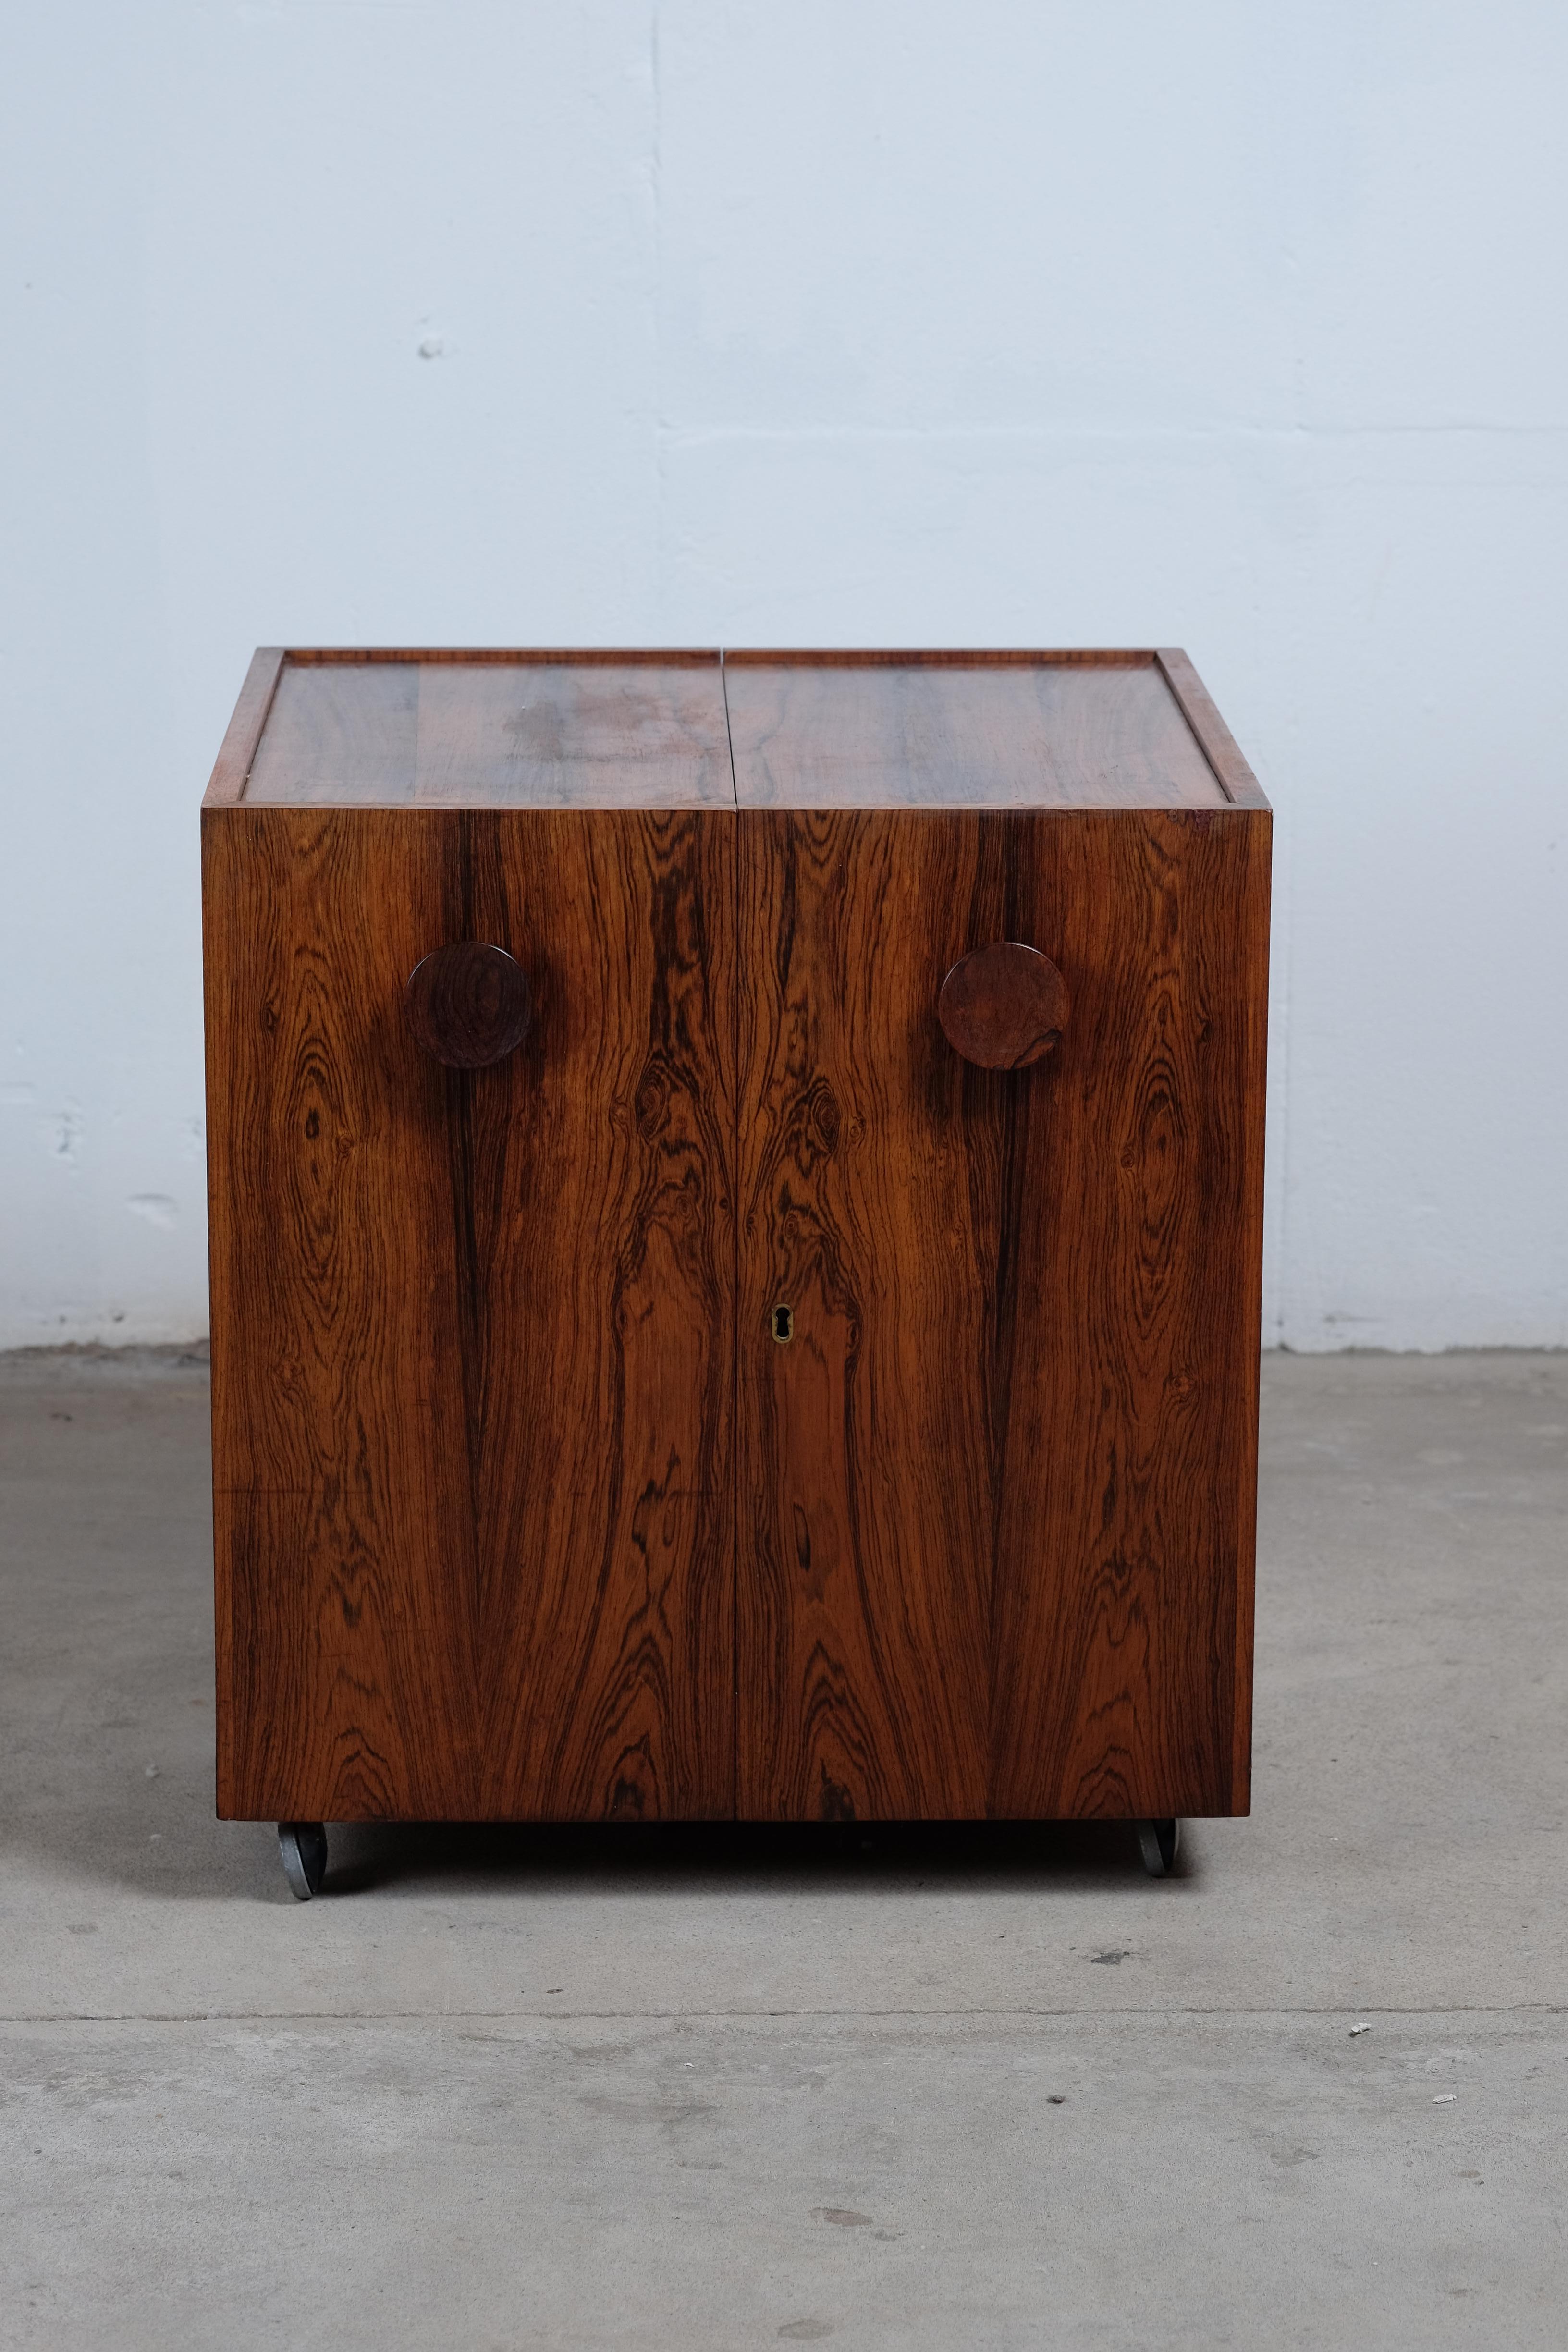 Square bar cabinet designed by Erik Buch, manufactured by Dyrlund around the 60s. Danish design.
Rosewood with brass details, two adjustable/removable linoleum trays and six metal wheels under. The lock doesn't work, but can be fixed by an